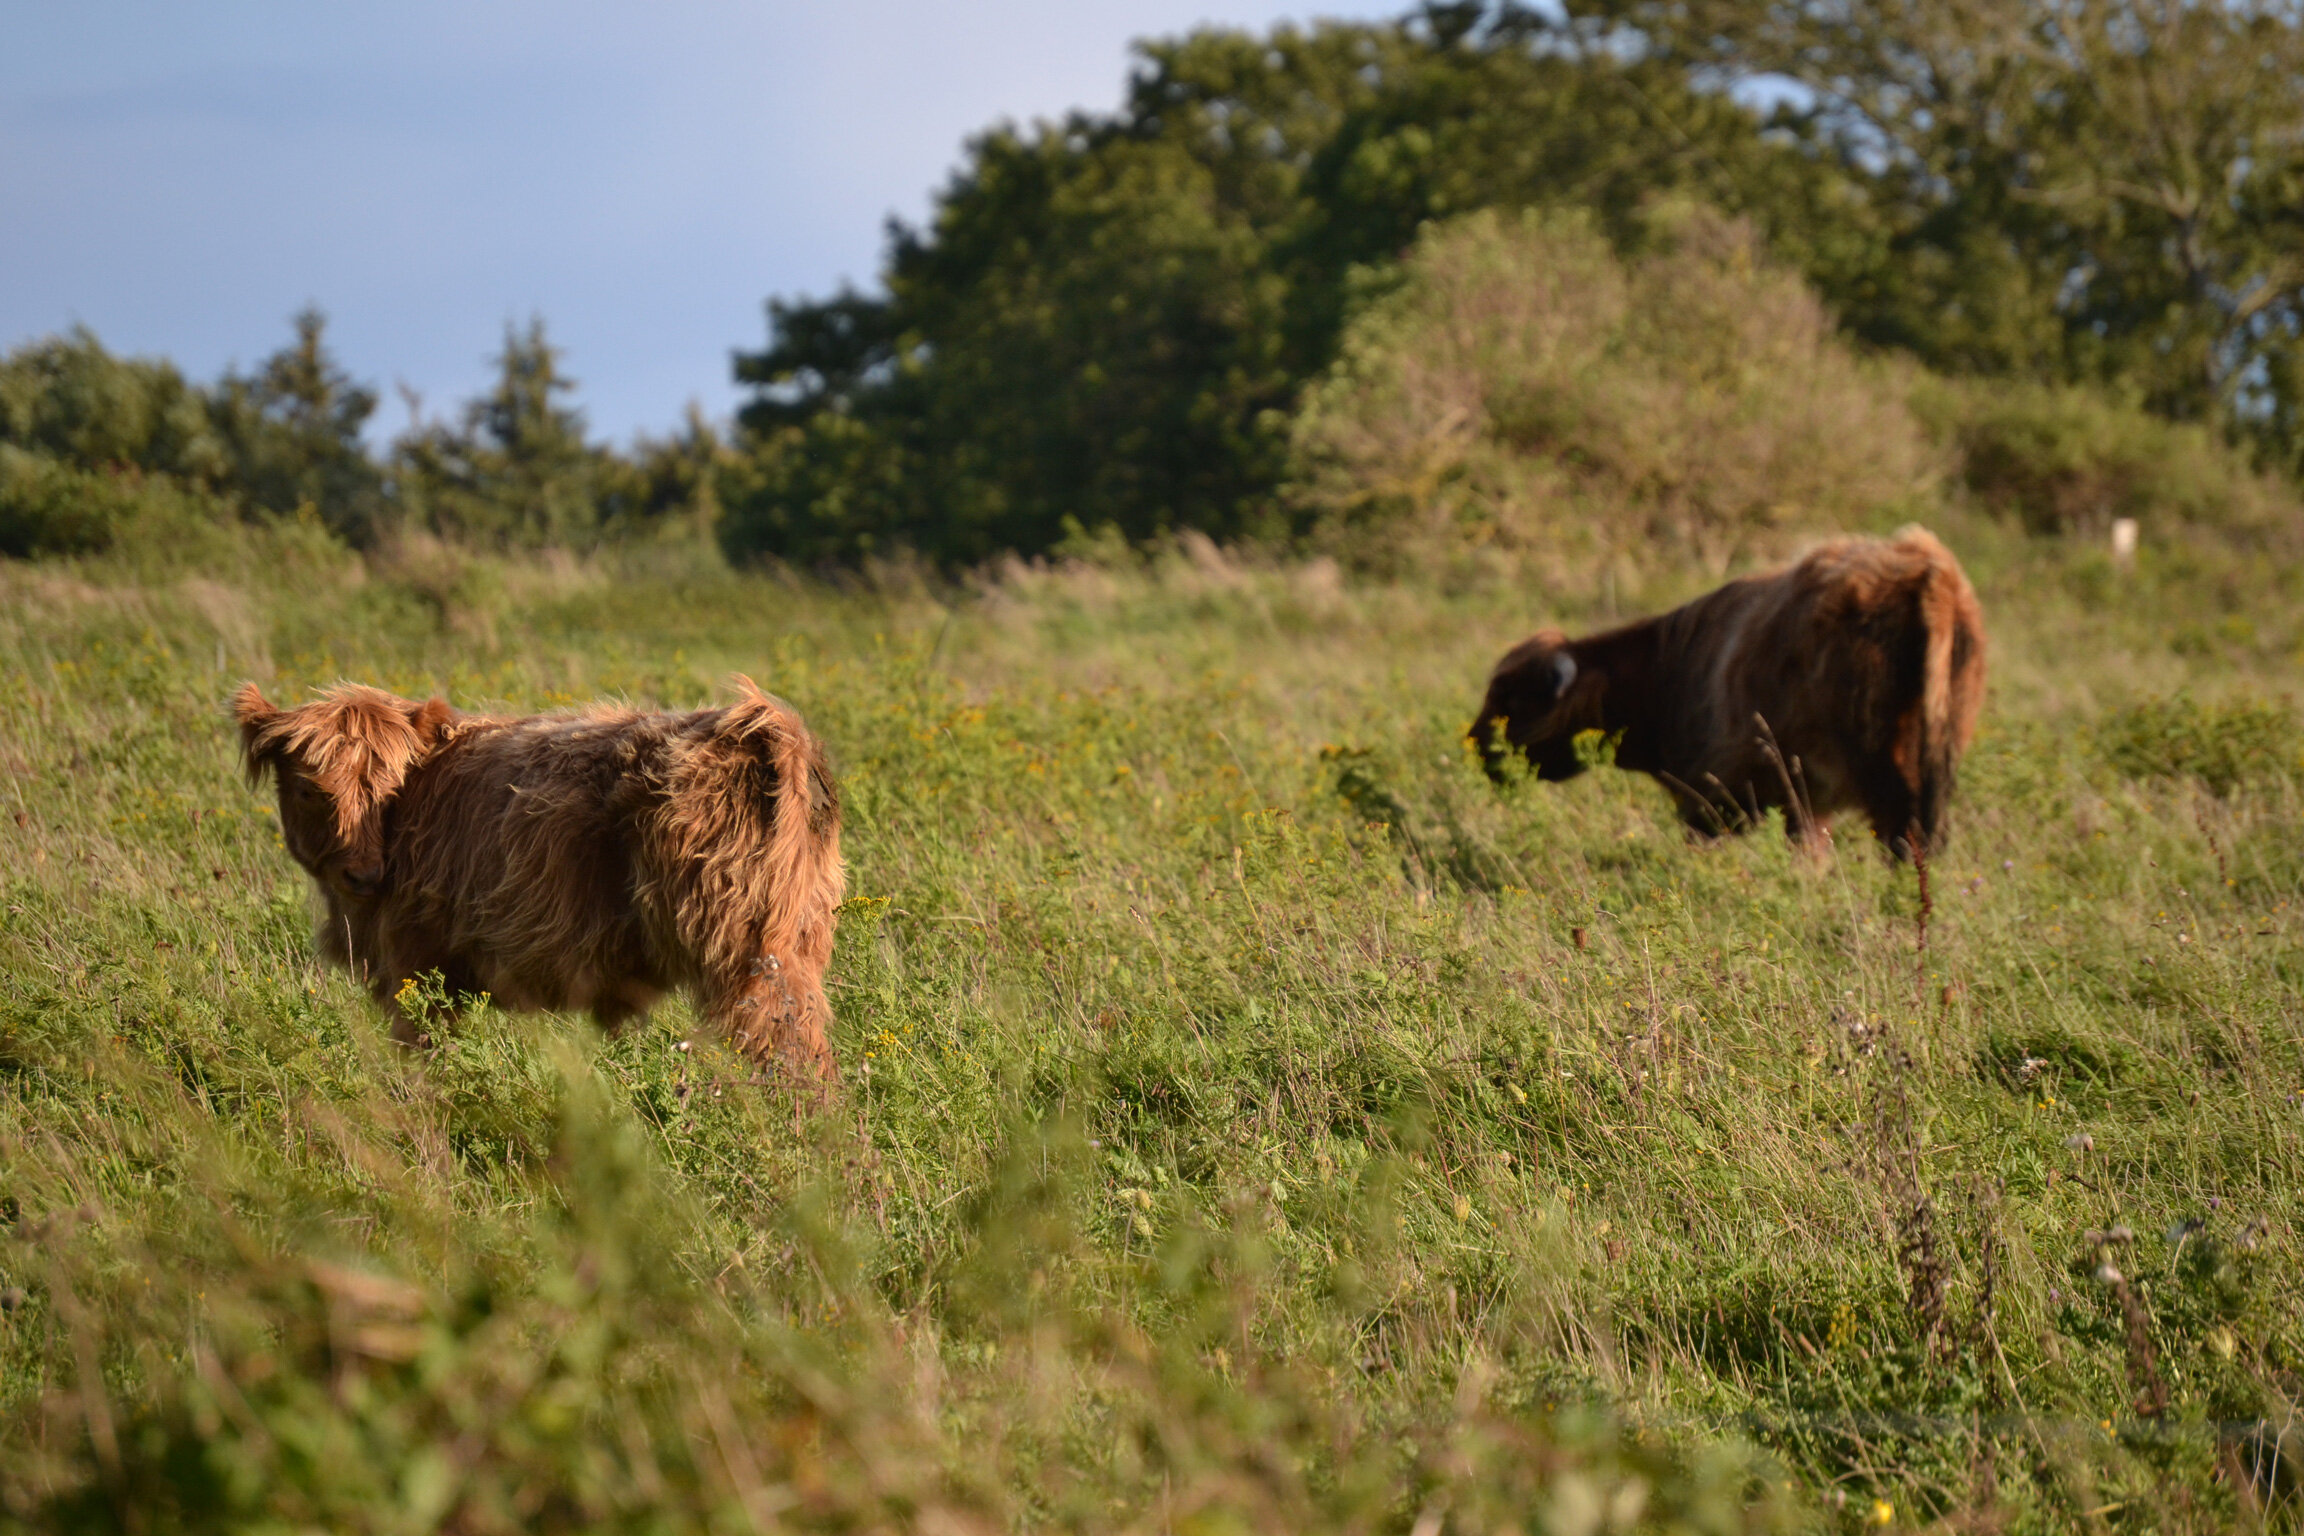 photo of Low-intensity grazing is locally better for biodiversity but challenging for land users, study shows image